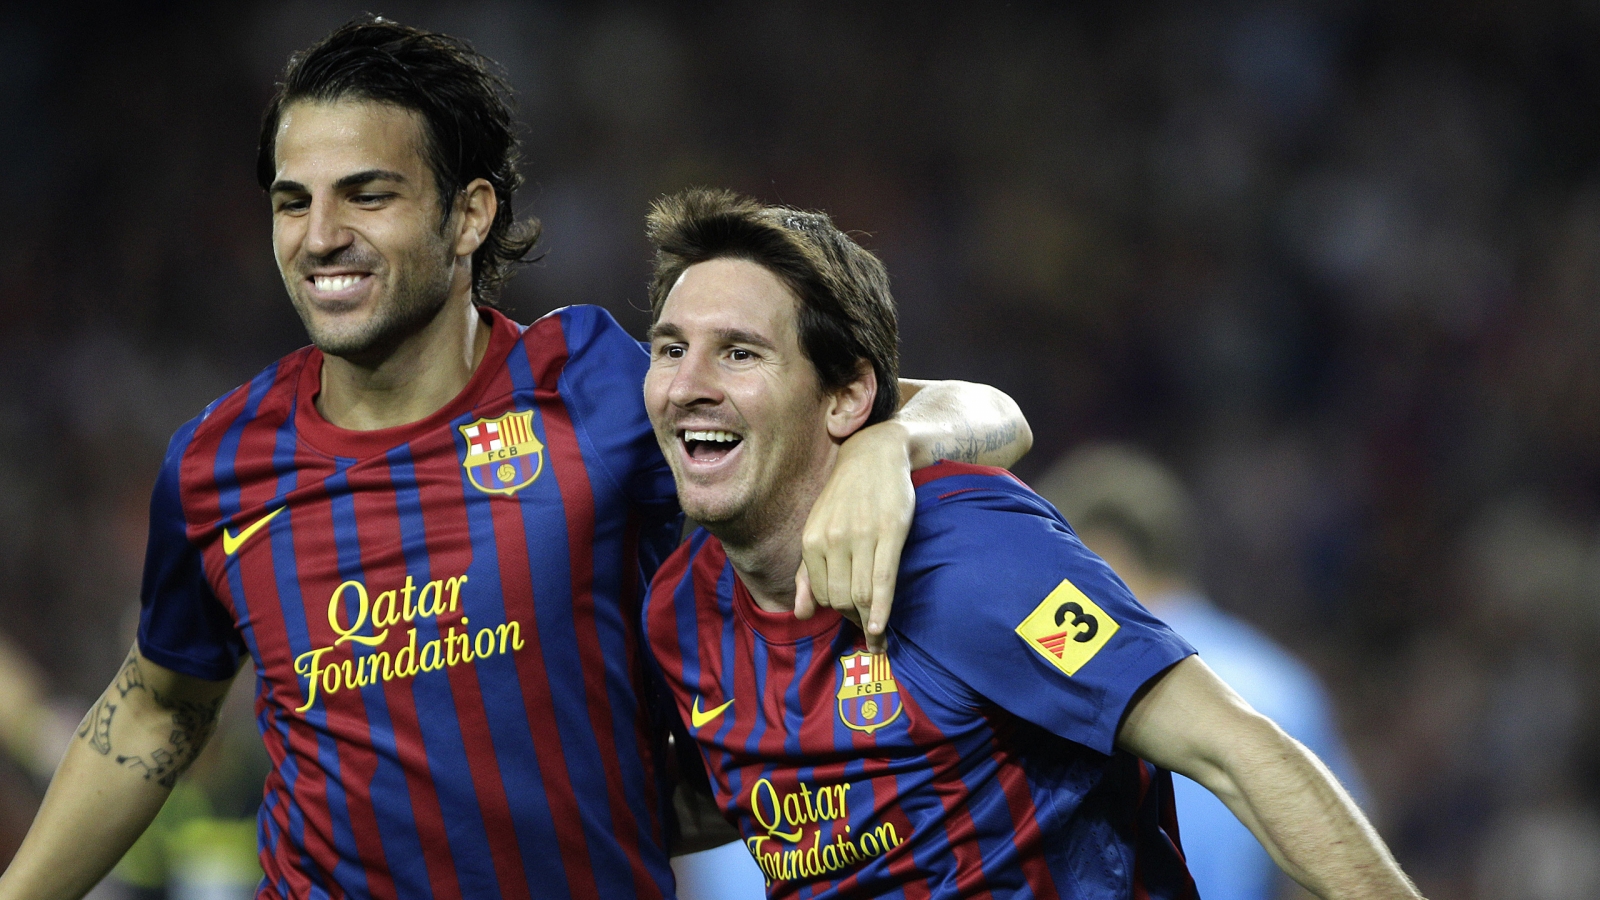 Cesc Fabregas and Lionel Messi for 1600 x 900 HDTV resolution